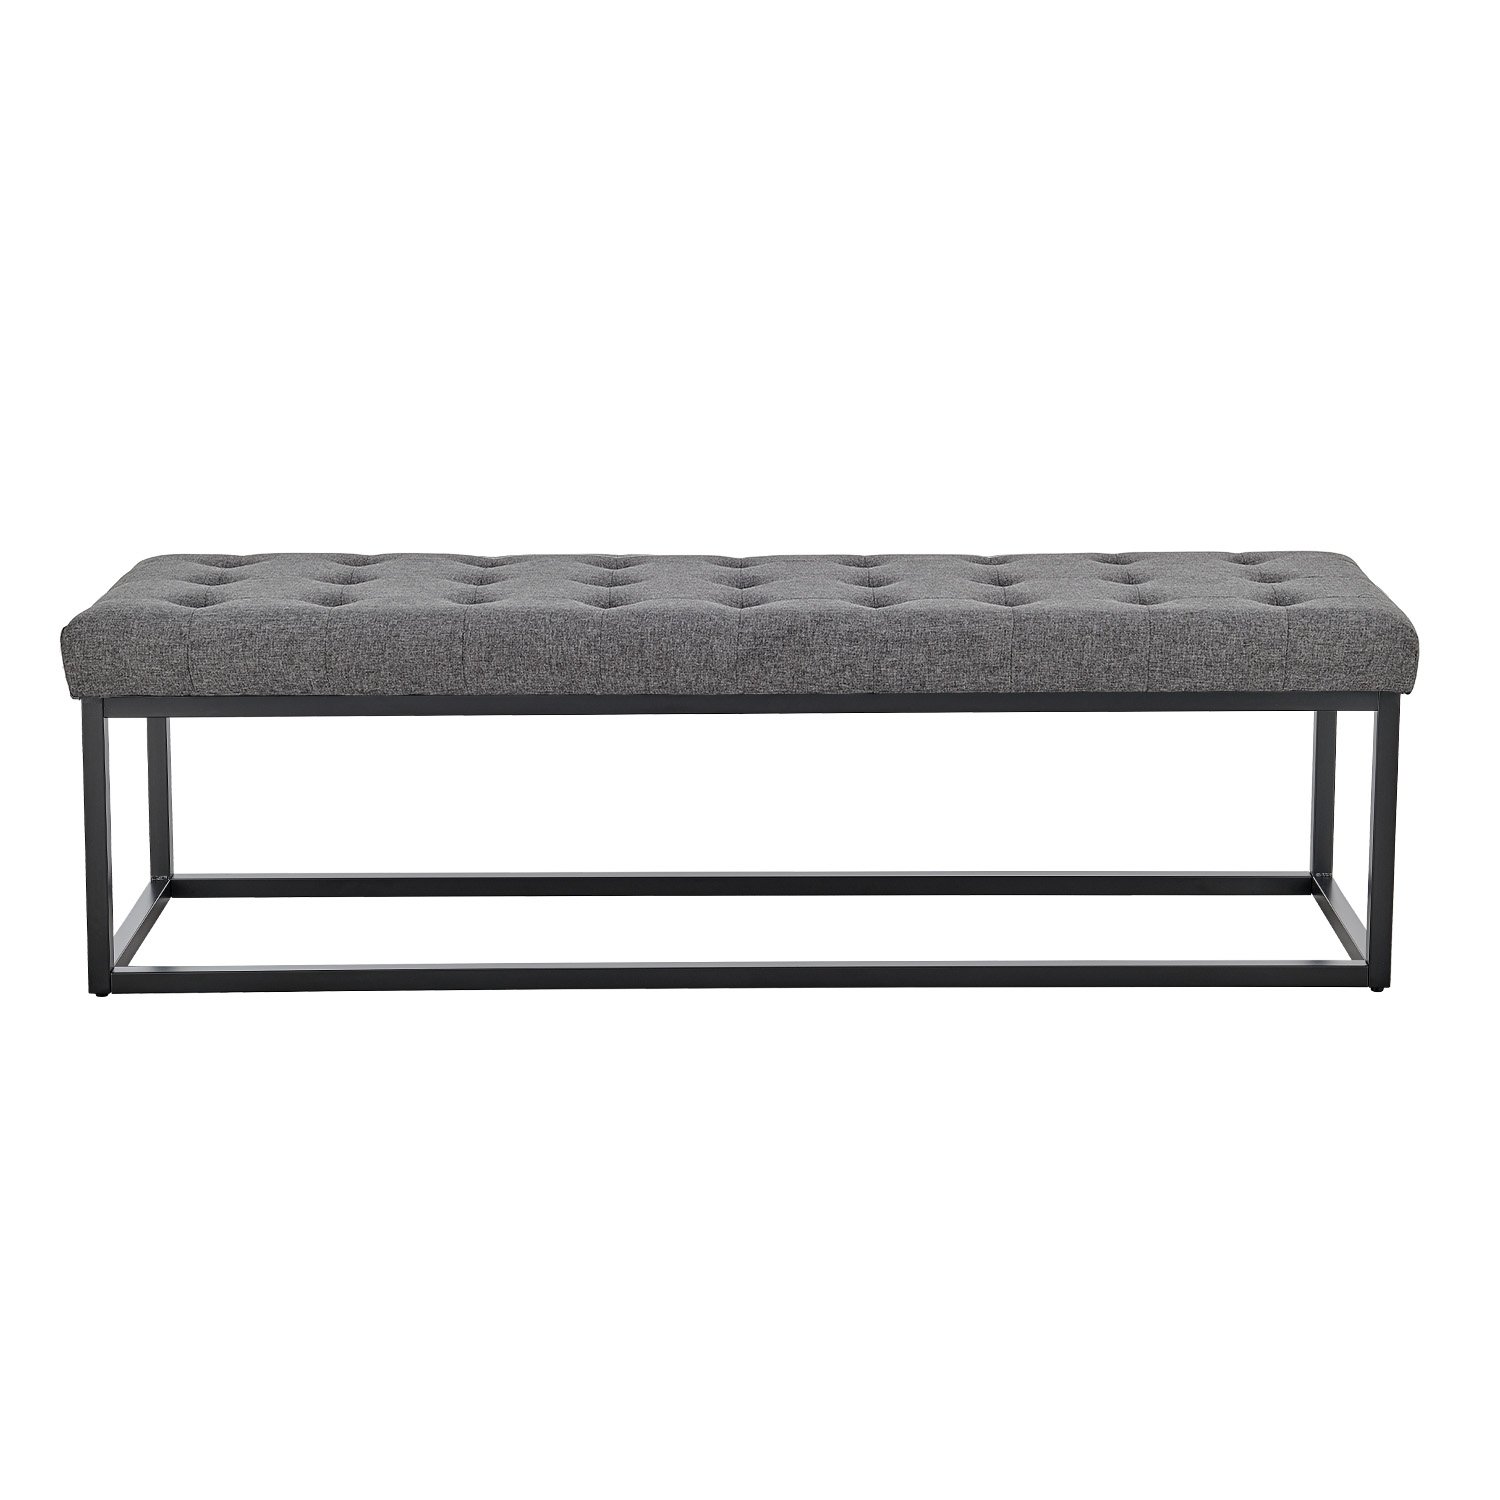 Cameron Button-Tufted Upholstered Bench with Metal Legs -Dark Grey 1